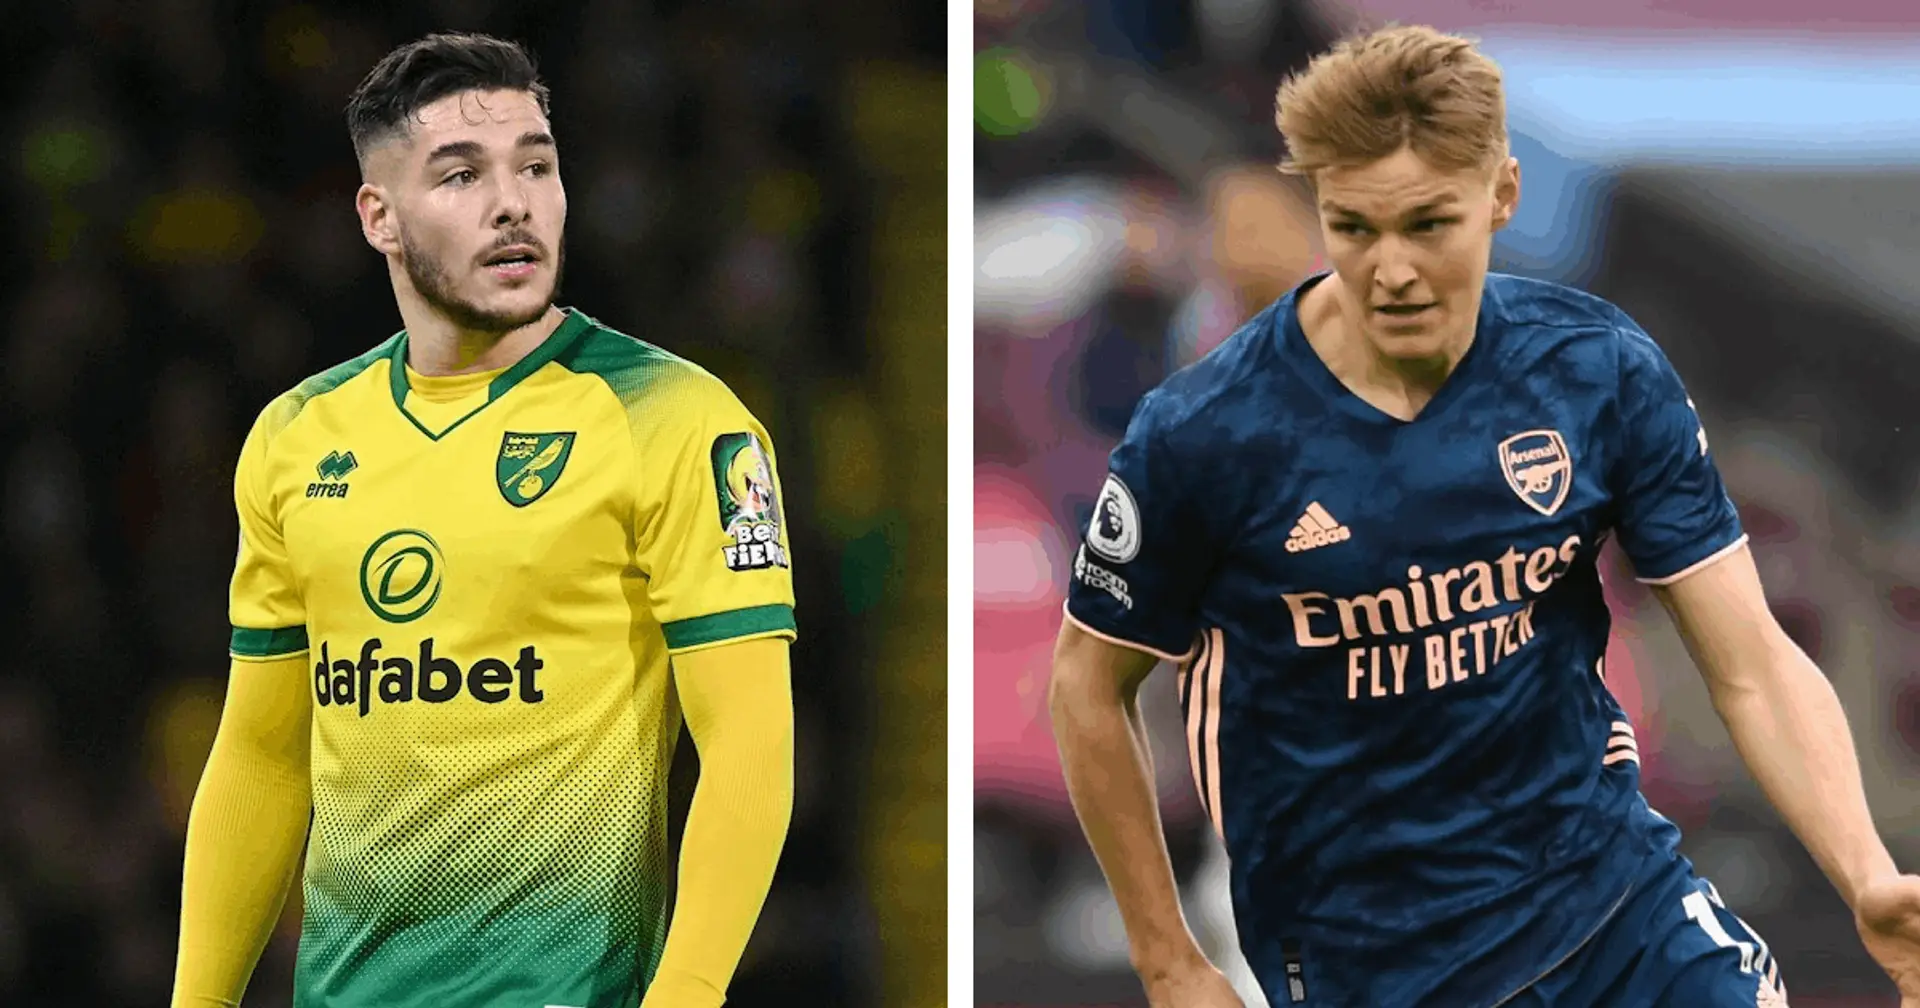 🤔 Odegaard or Buendia? If you could choose to sign one of the two, who would you go for and why?